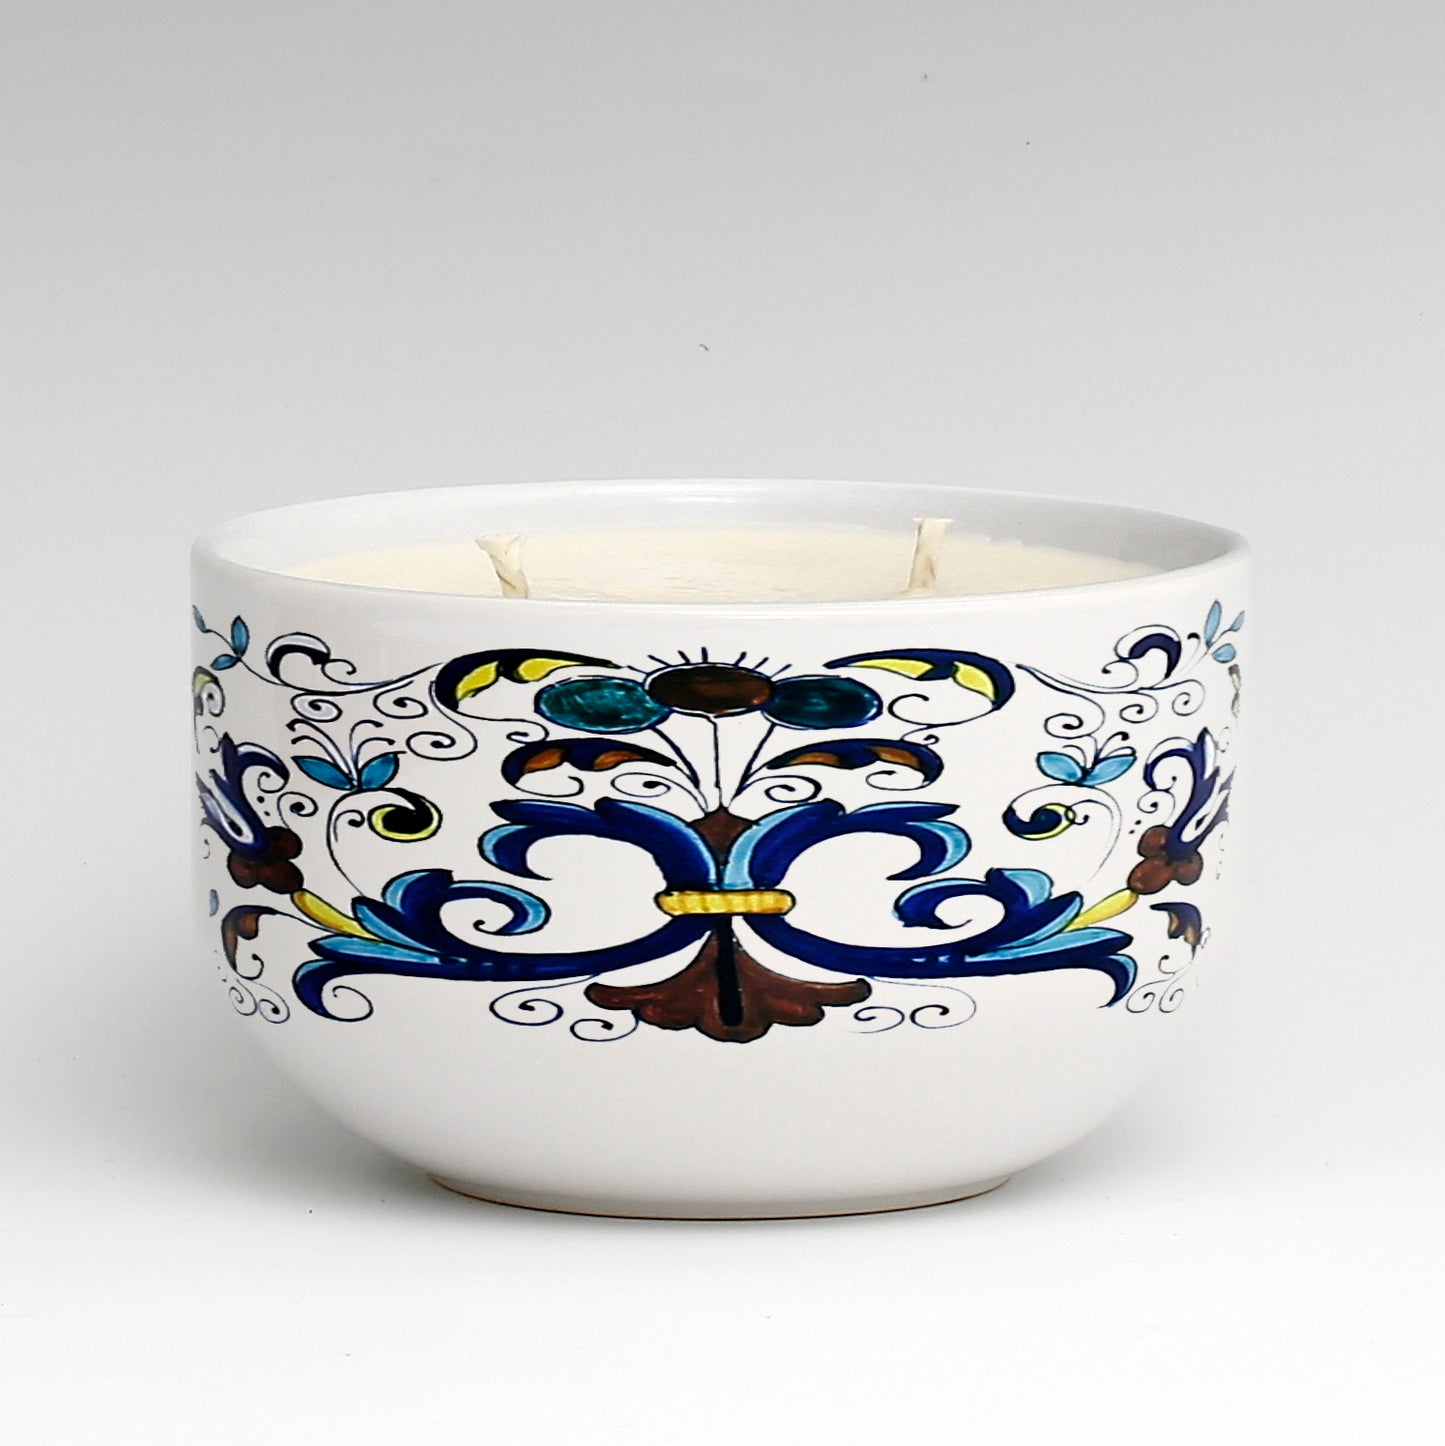 SUBLIMART: Two Wicks Soy Wax Candle in a Porcelain Bowl - Deruta Style (Design #DER04)